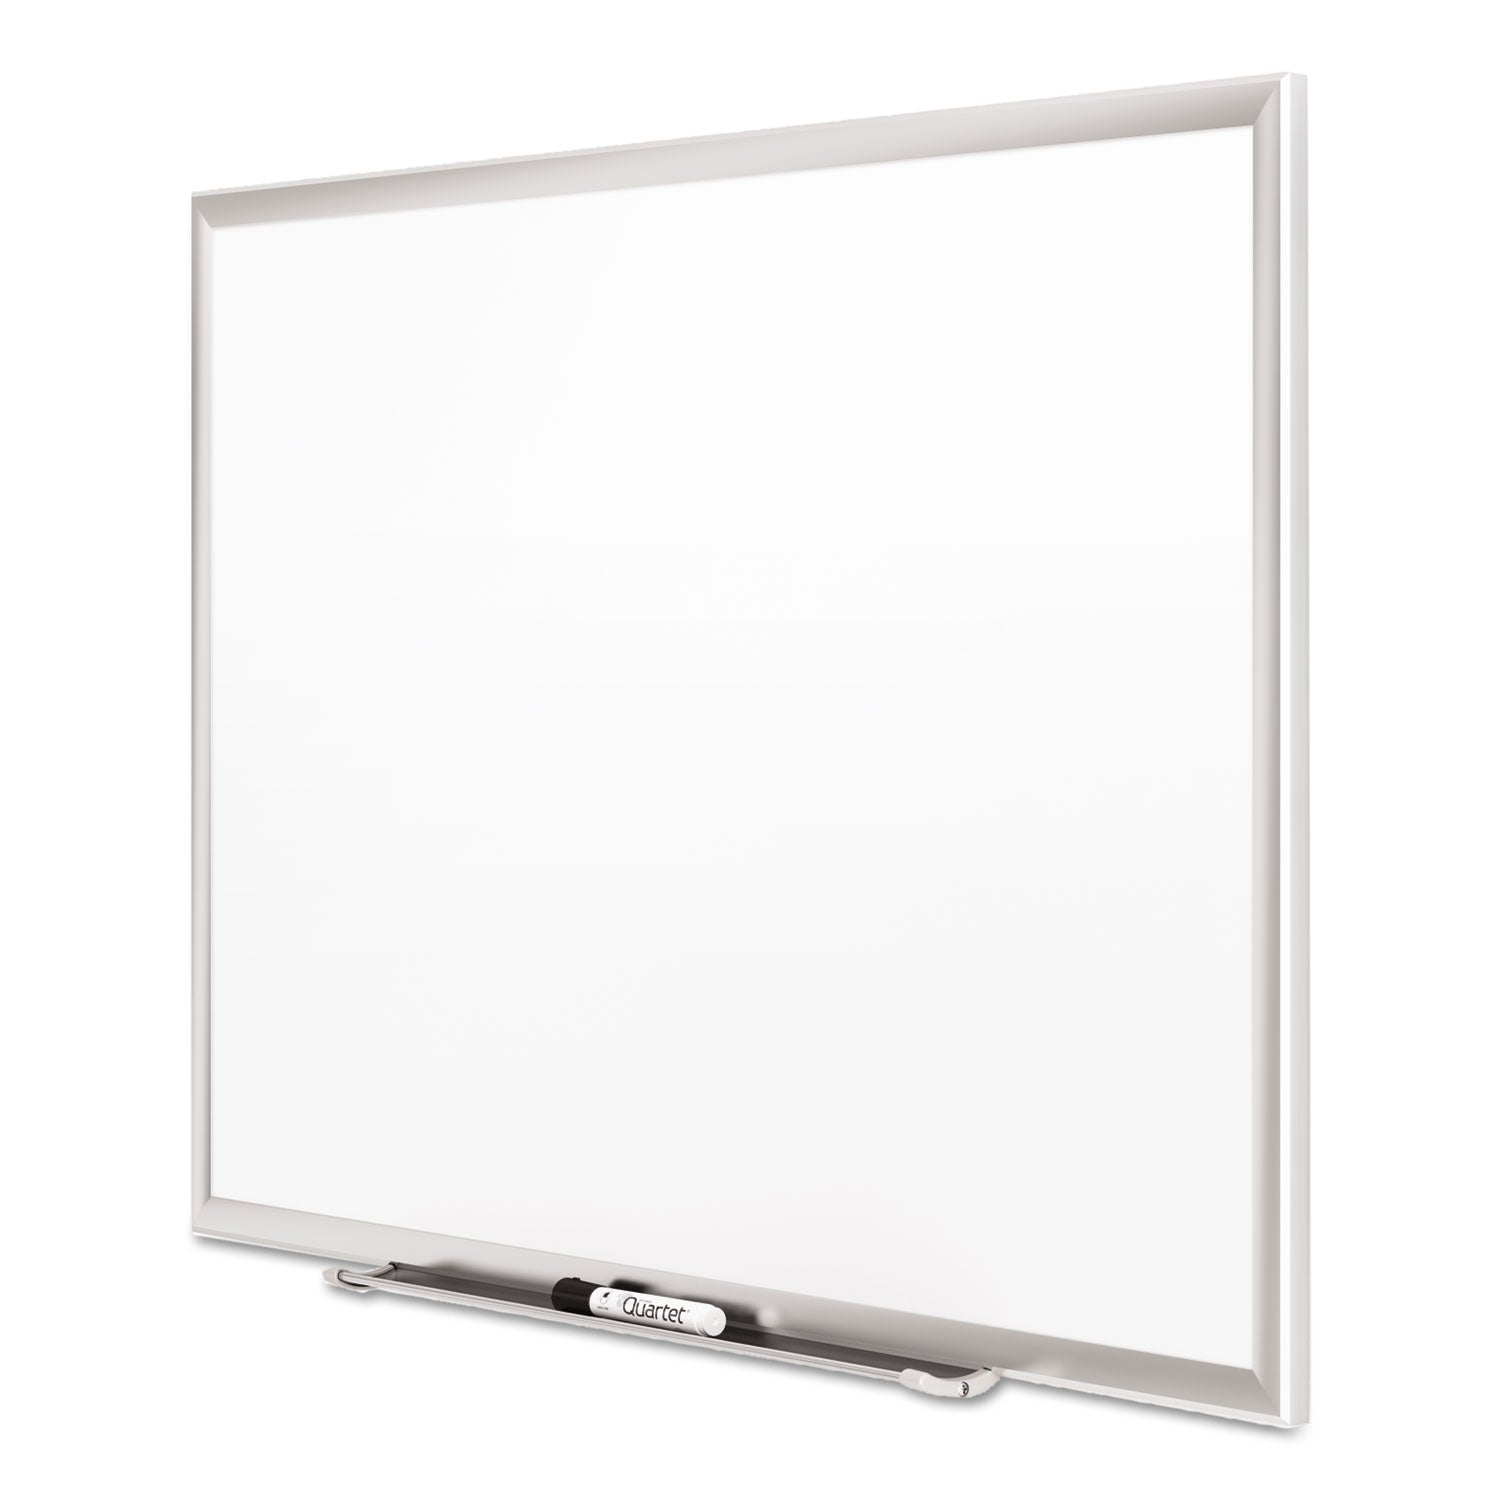 Classic Series Porcelain Magnetic Dry Erase Board, 48 x 36, White Surface, Silver Aluminum Frame - 